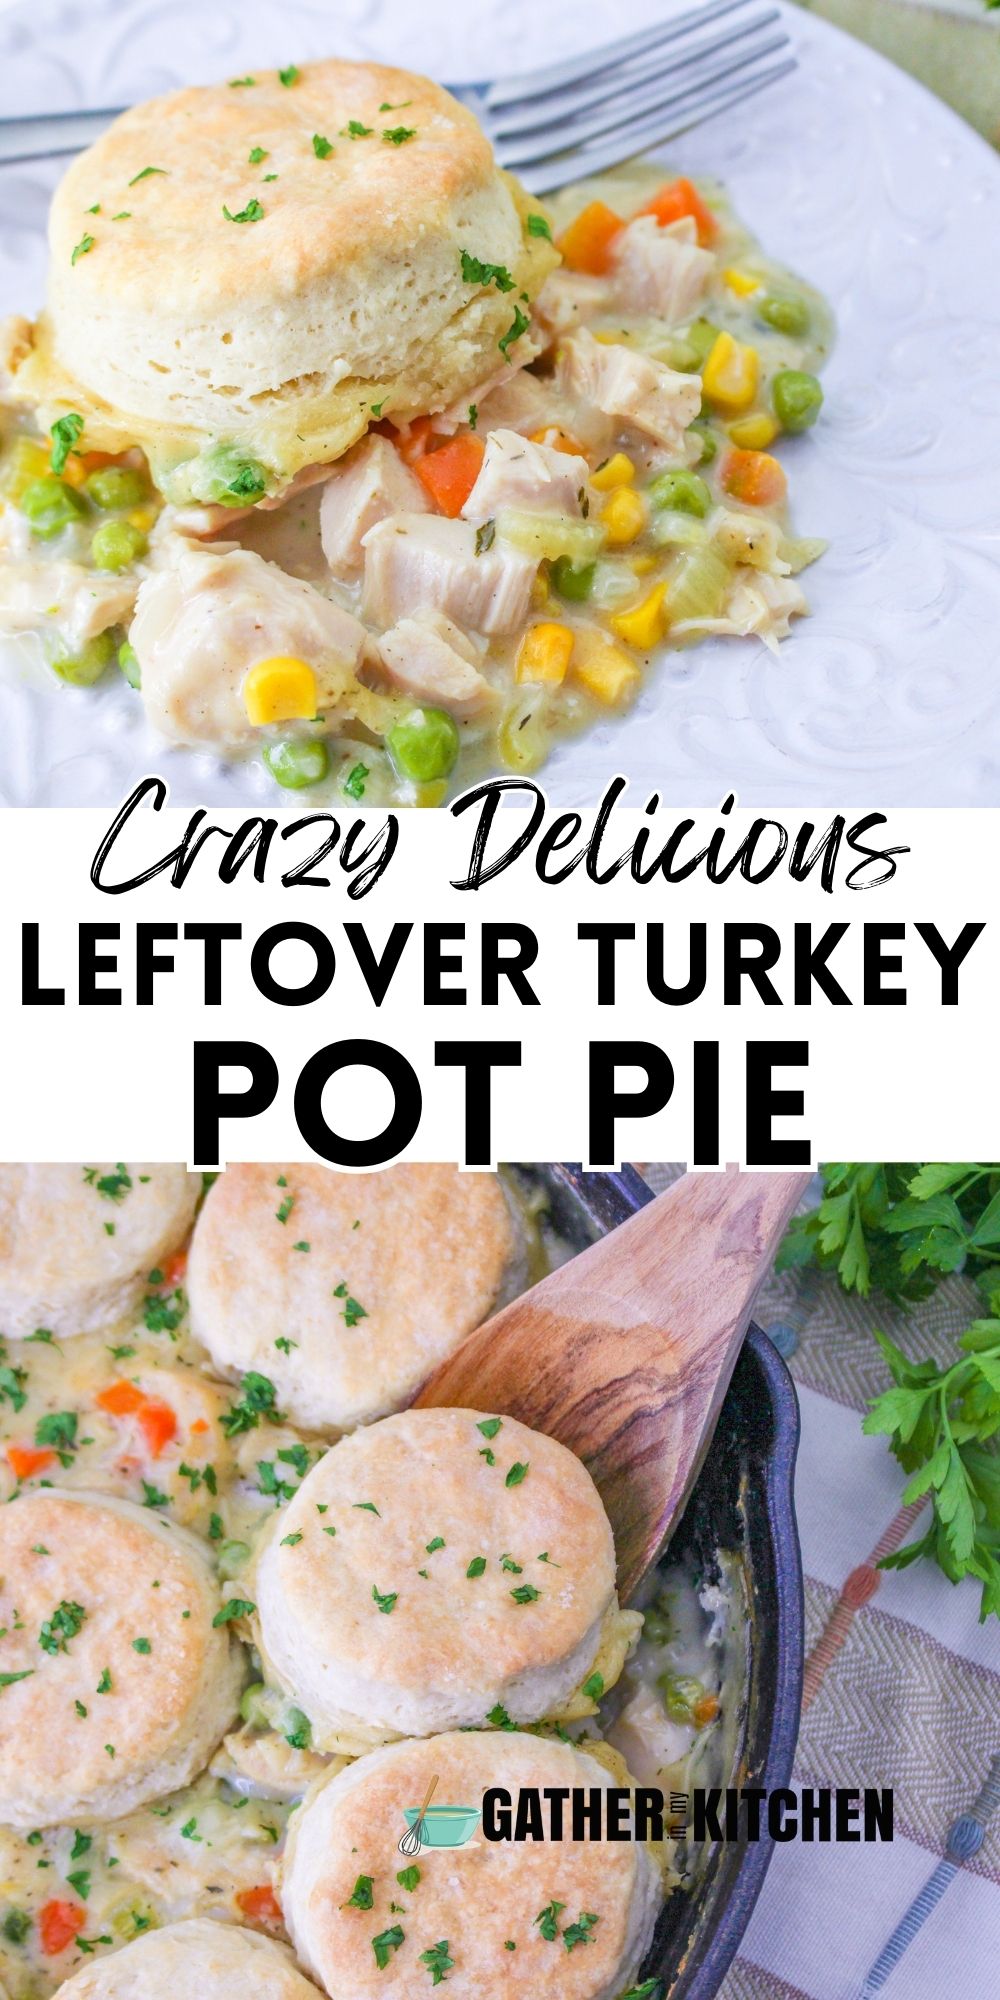 Pin image: top is a plate of turkey pot pie, middle says "Crazy Delicious Leftover Turkey Pot Pie" and bottom is a Turkey pot pie on a skillet.